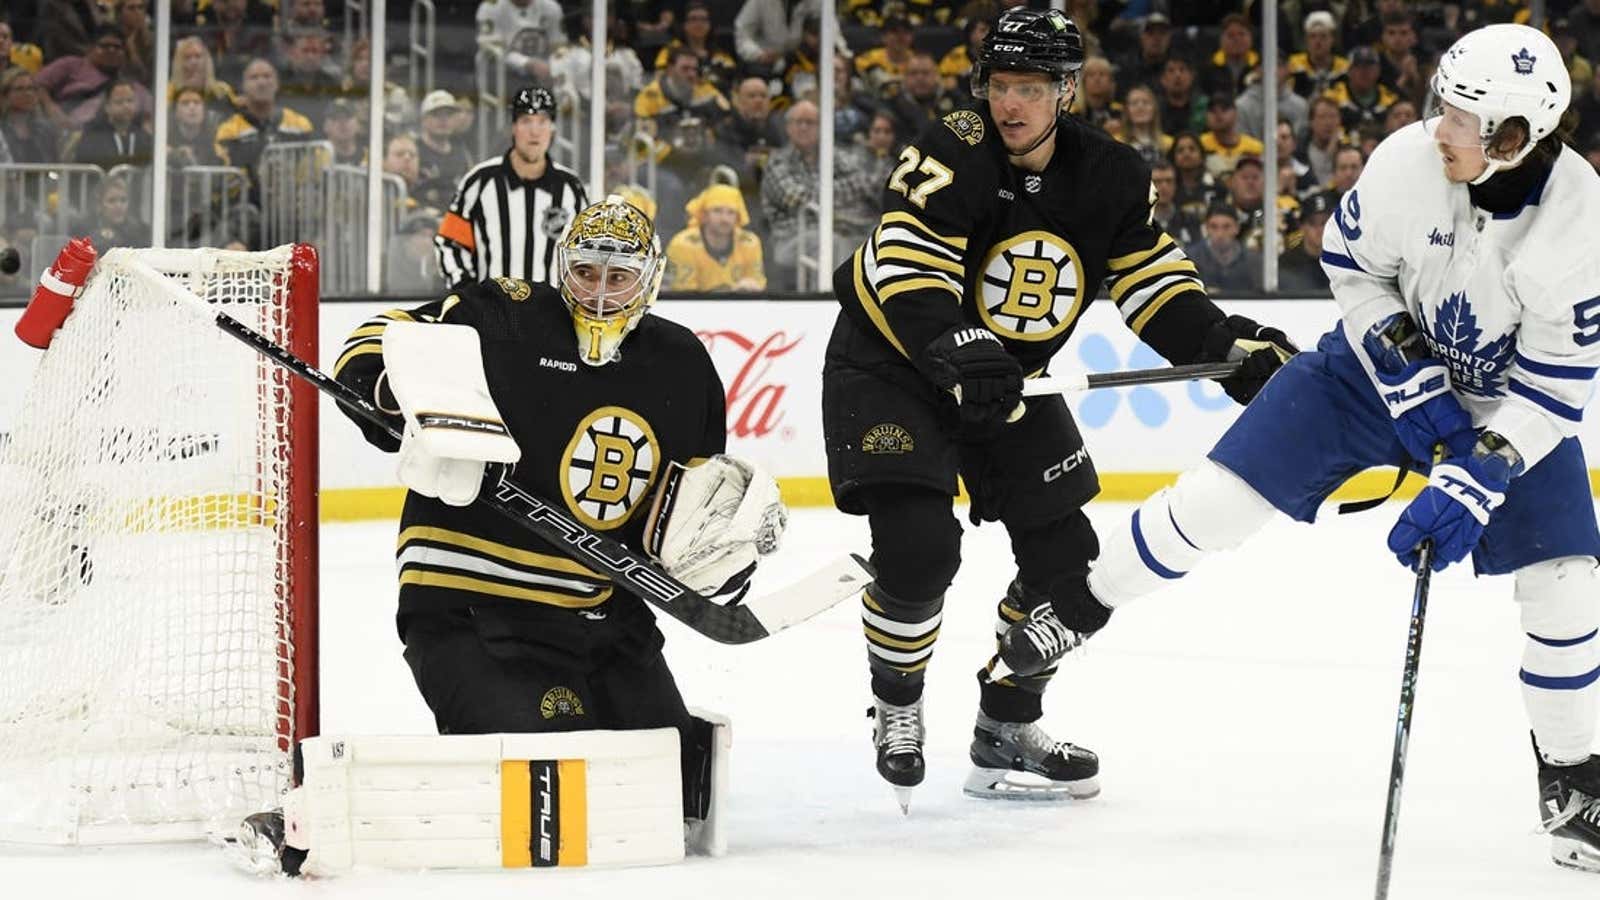 Image for Bruins end Leafs' season with OT win in Game 7